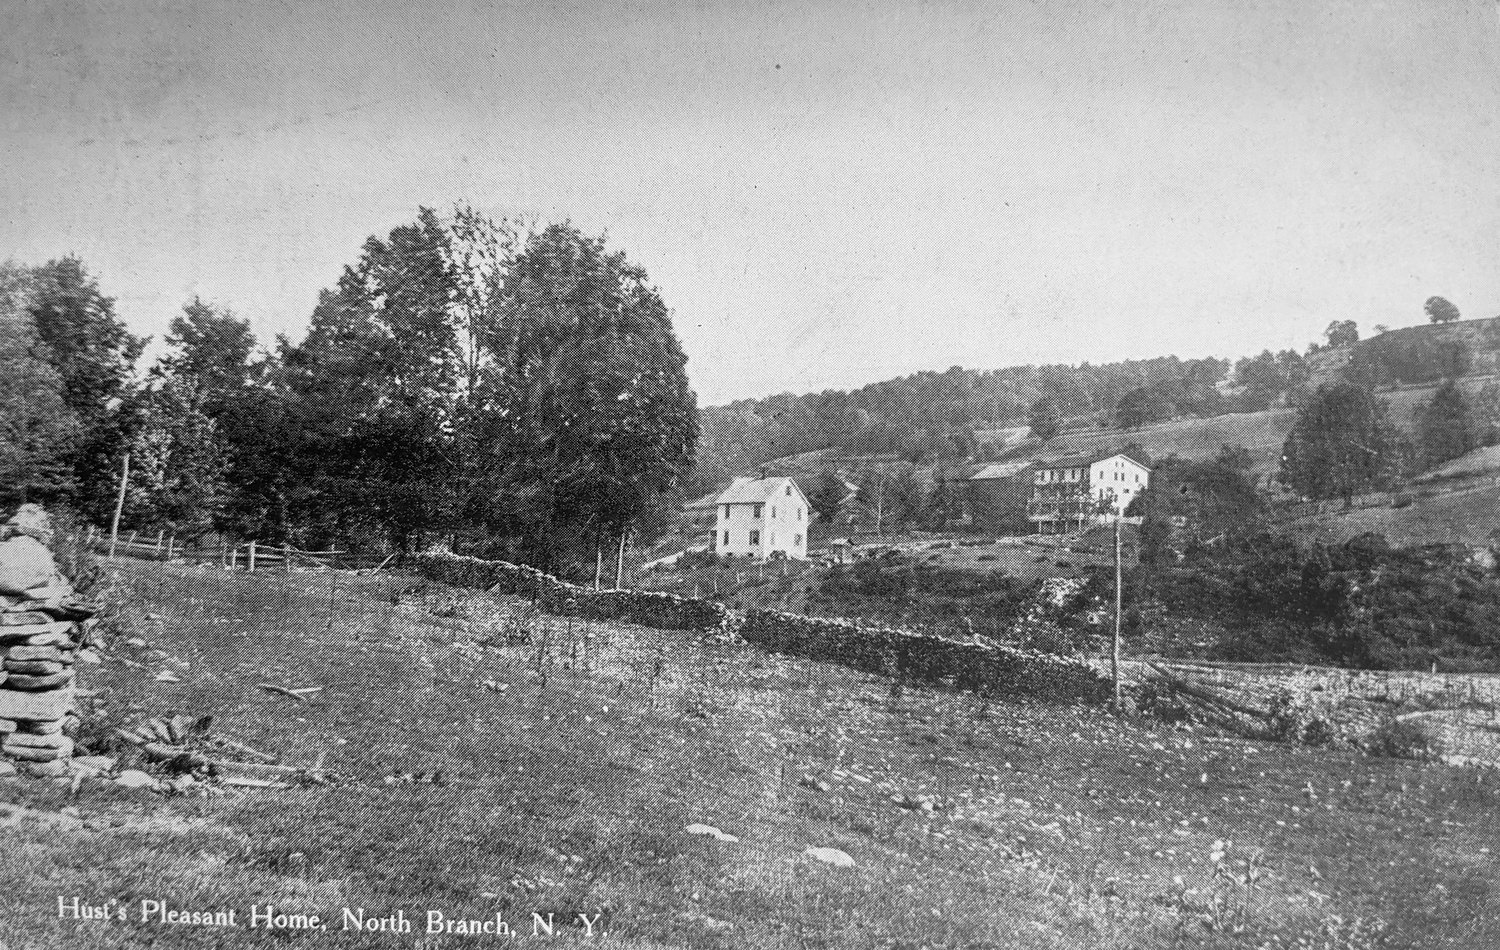 Hust’s Pleasant Home

This postcard by G.V. Millar shows Hust’s Pleasant Home in the background at right. Located on Bayer Road in North Branch, it was built by Preston Goodman, whose wife, Carrie Hust, ran a boarding house there. Goodman and his wife removed to Binghamton in later years, and Harold Hust and his wife Mildred operated a dairy farm on this property. From the Albert VanDyke collection at the Sullivan County Historical Society in Hurleyville.